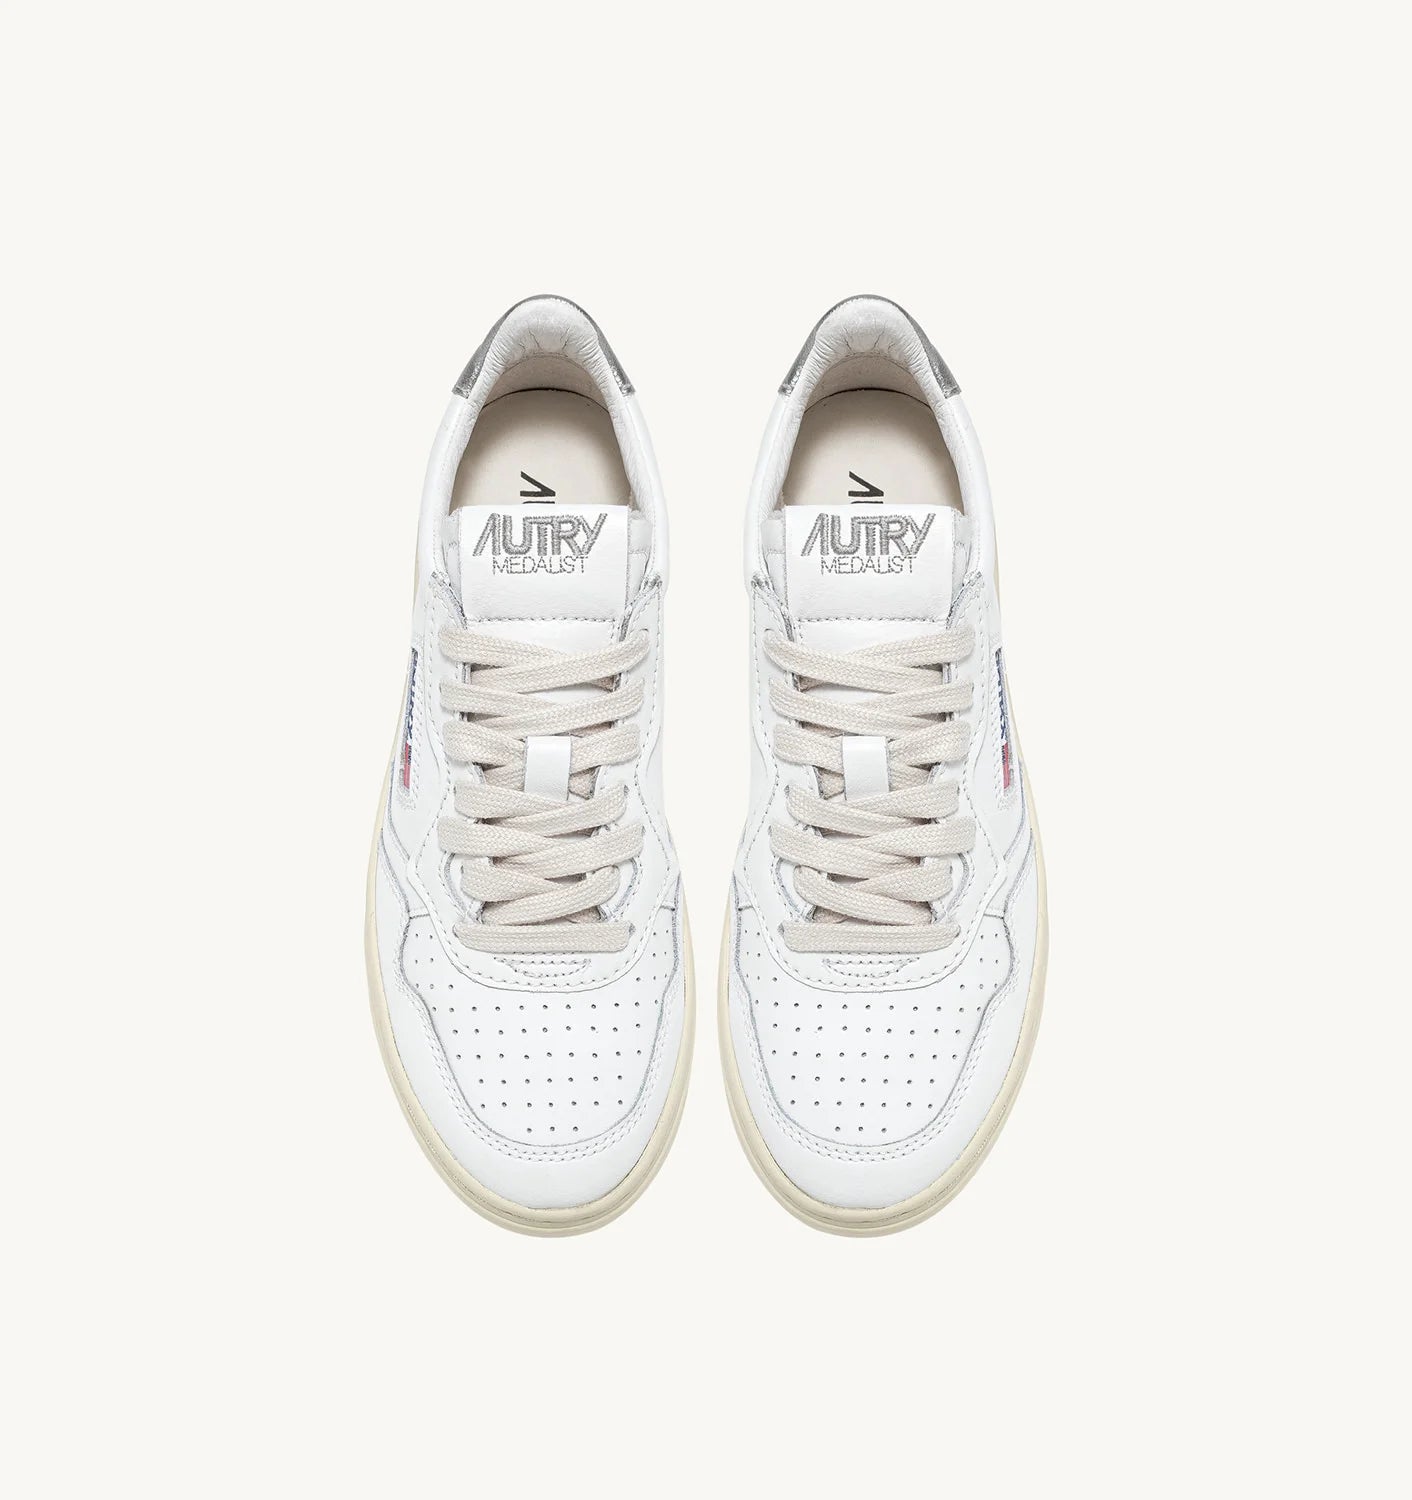 Autry Sneakers Donna Medalist AULW-LL05 White/Silver